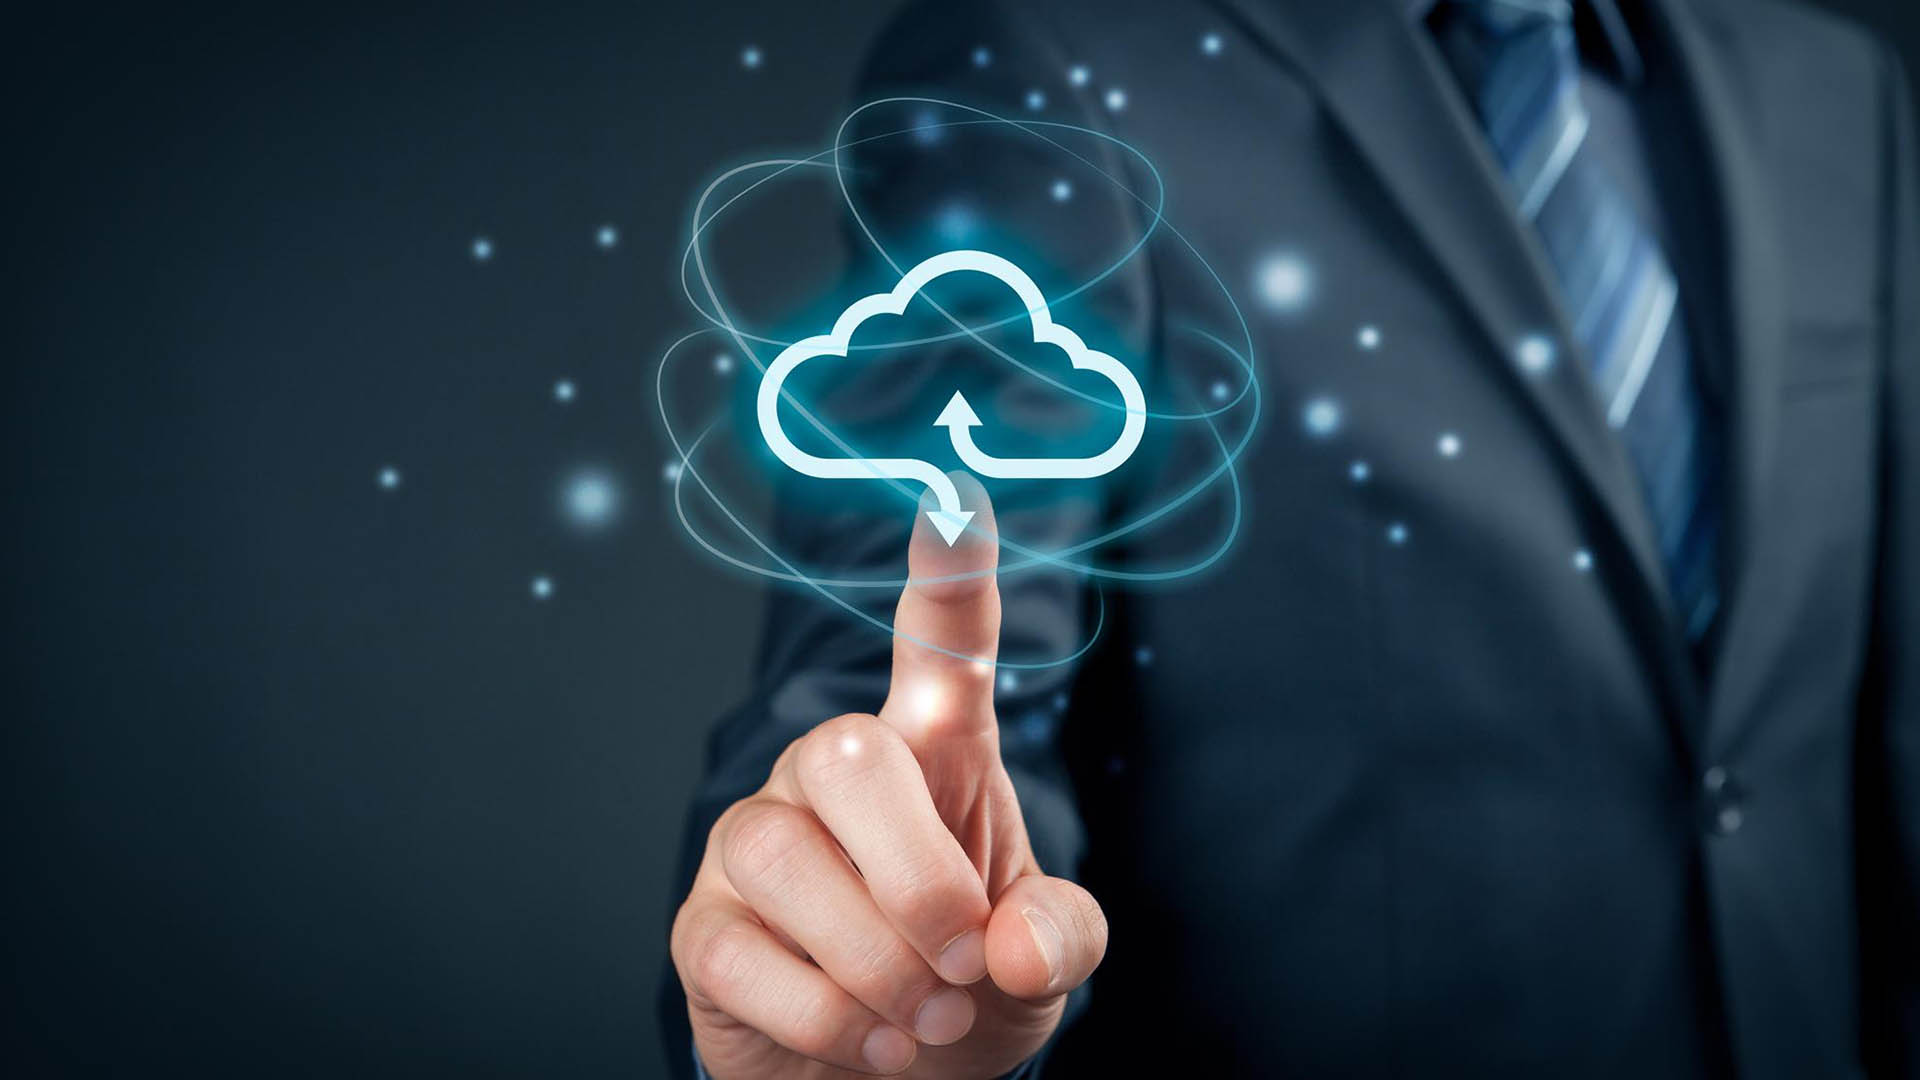 Why Consider Shifting to Cloud Solutions?